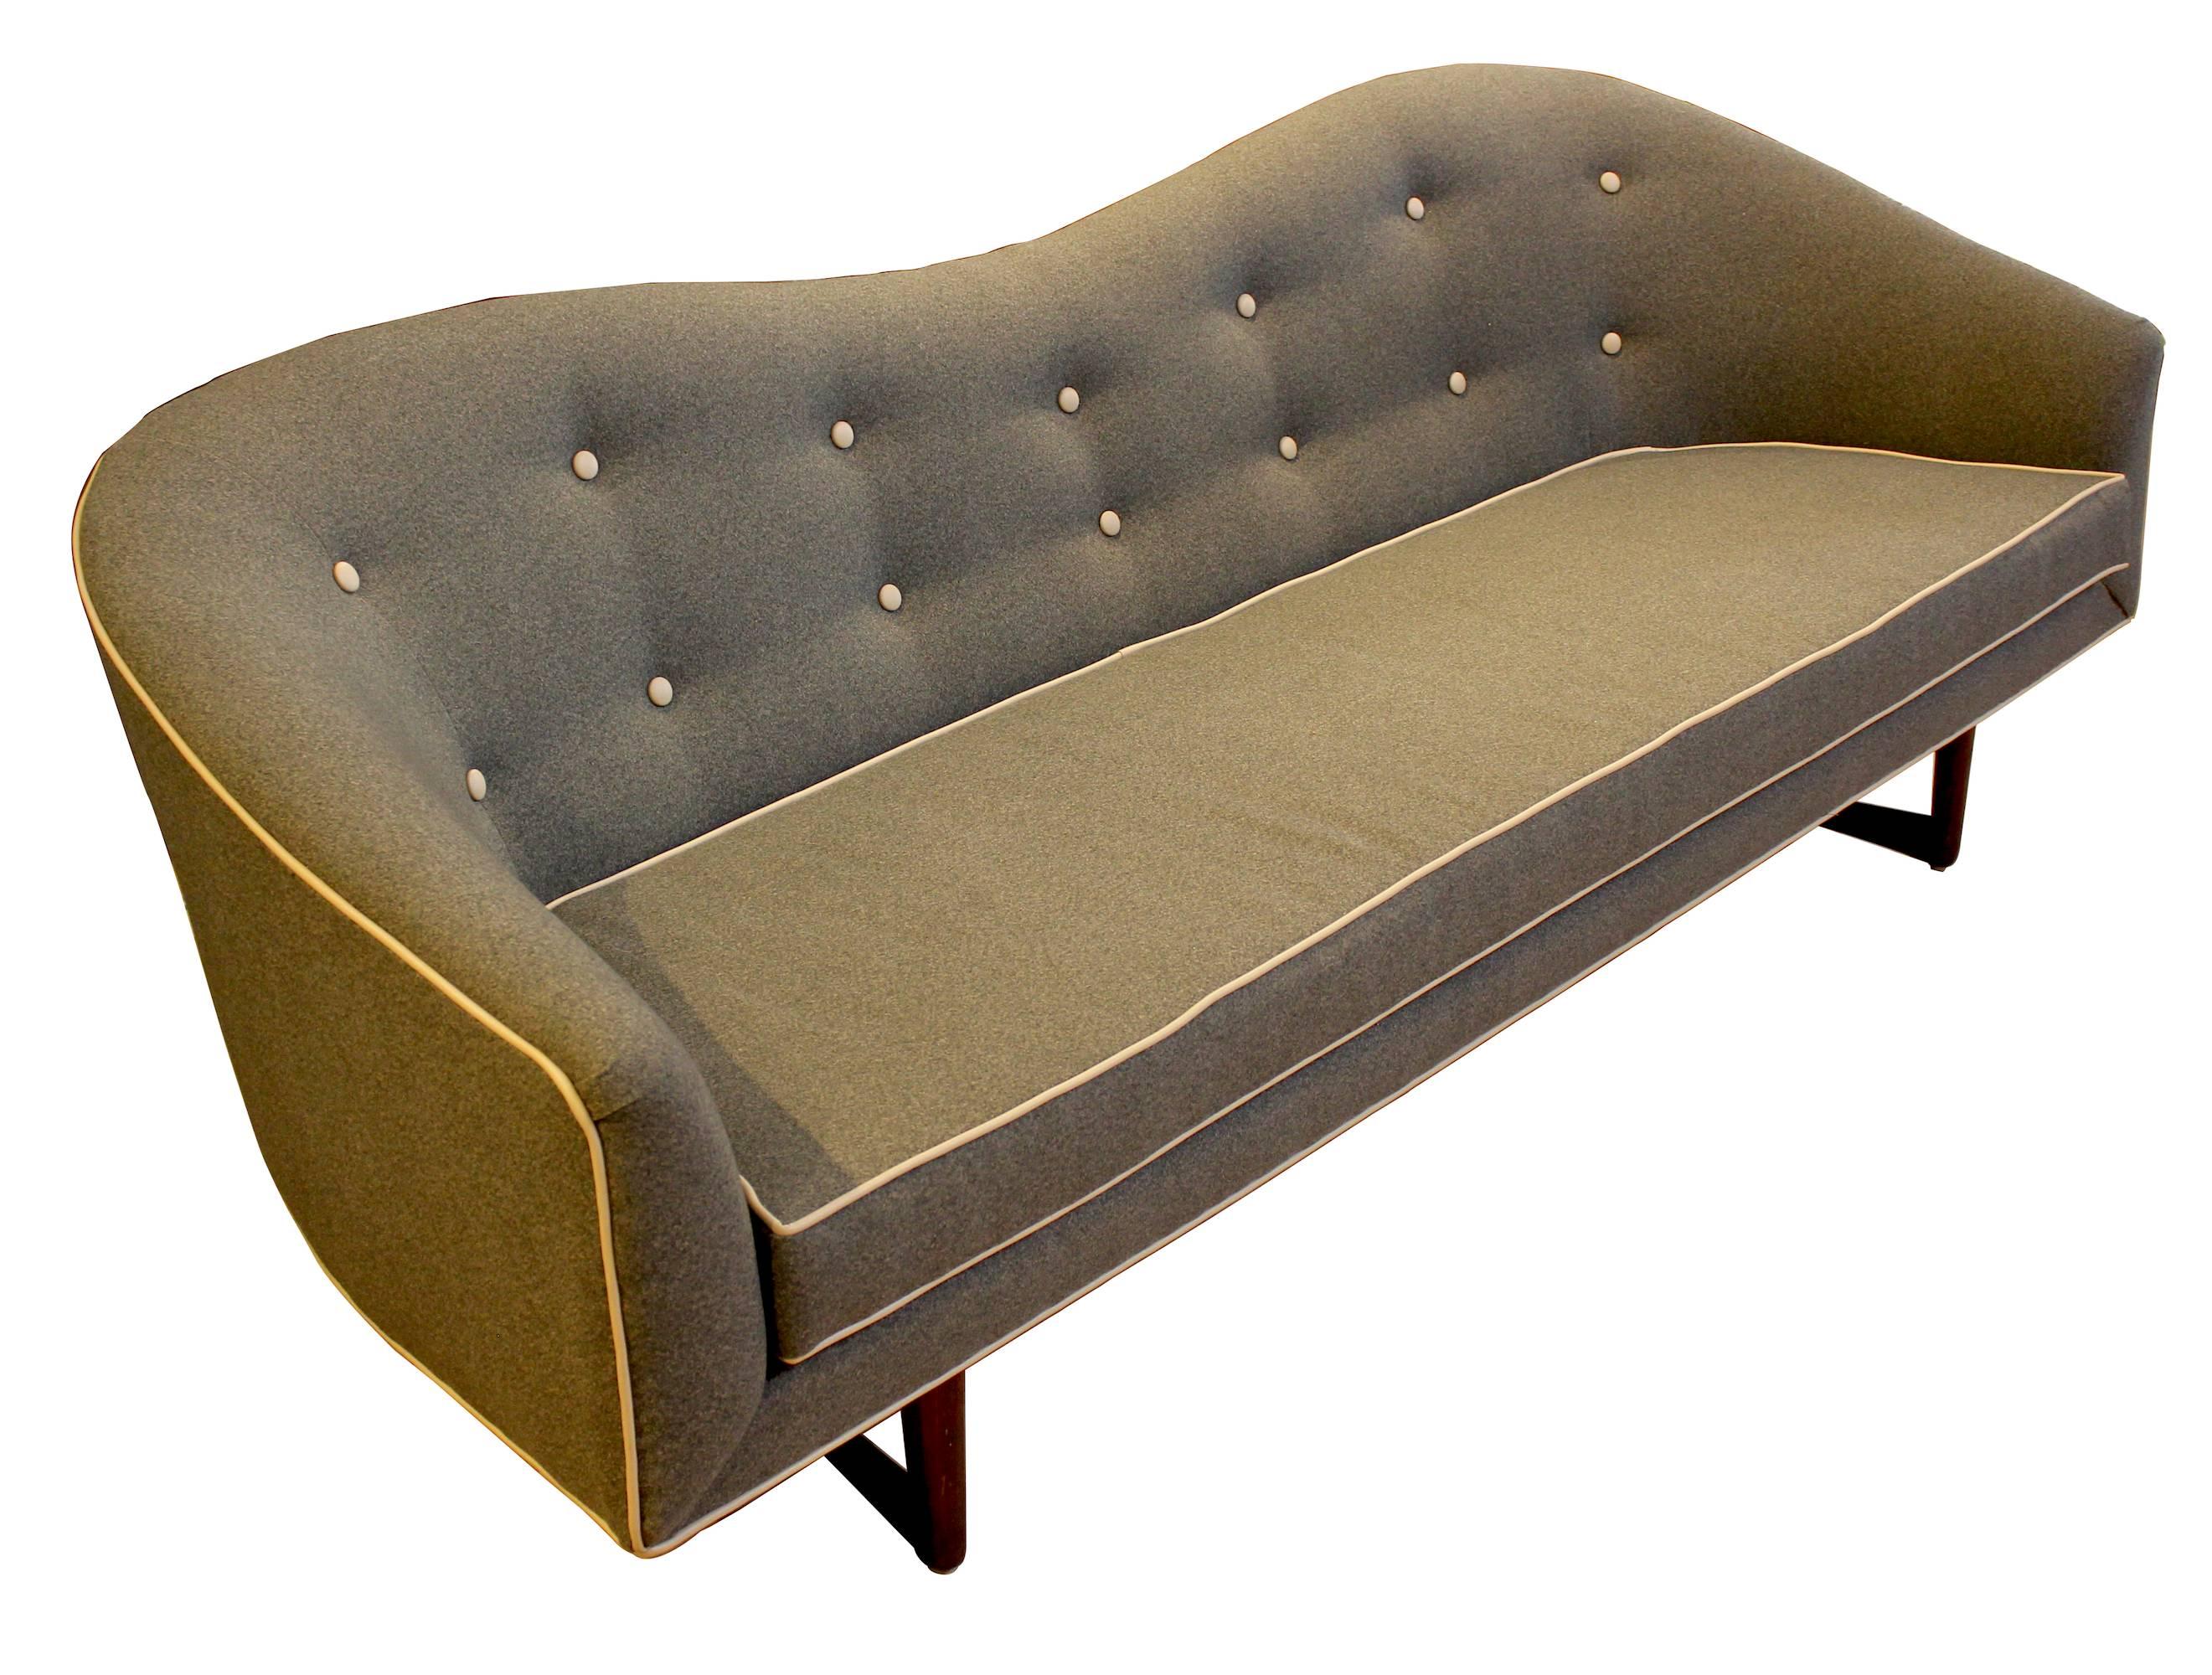 1960s camelback sofa, newly reupholstered in gray felt with contrast welting and buttons.